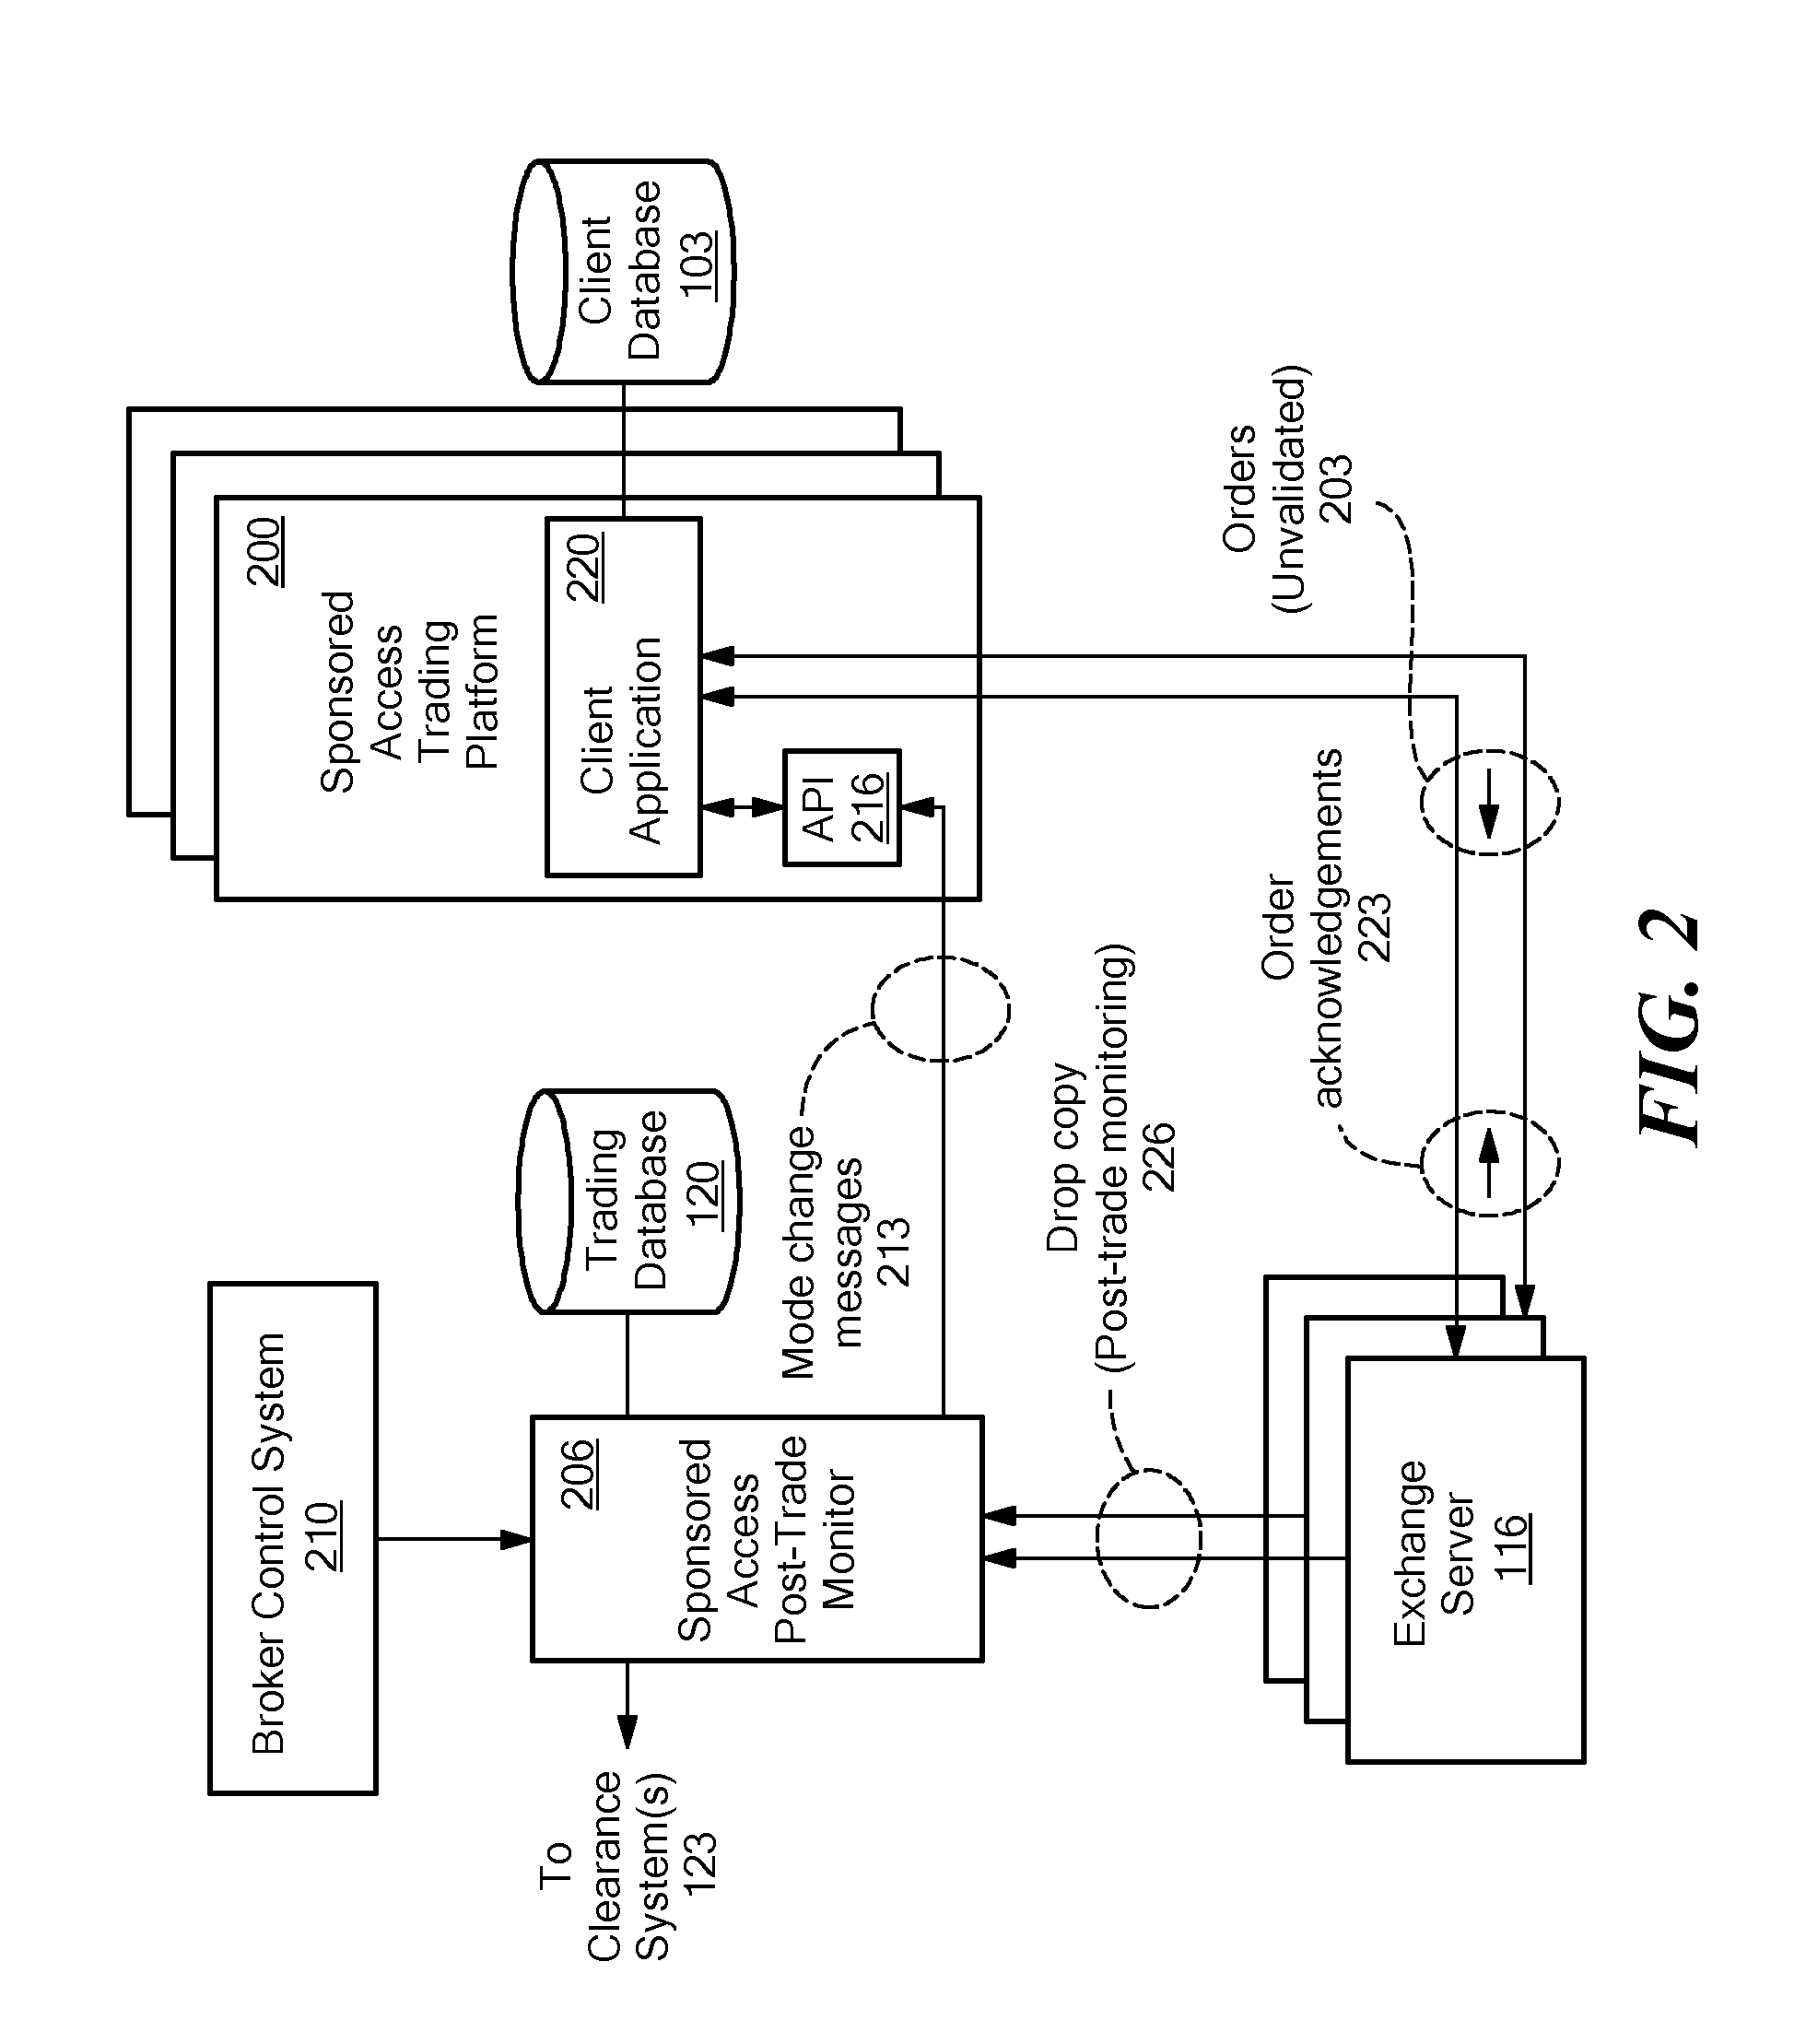 Trading Order Validation System and Method and High-Performance Trading Data Interface